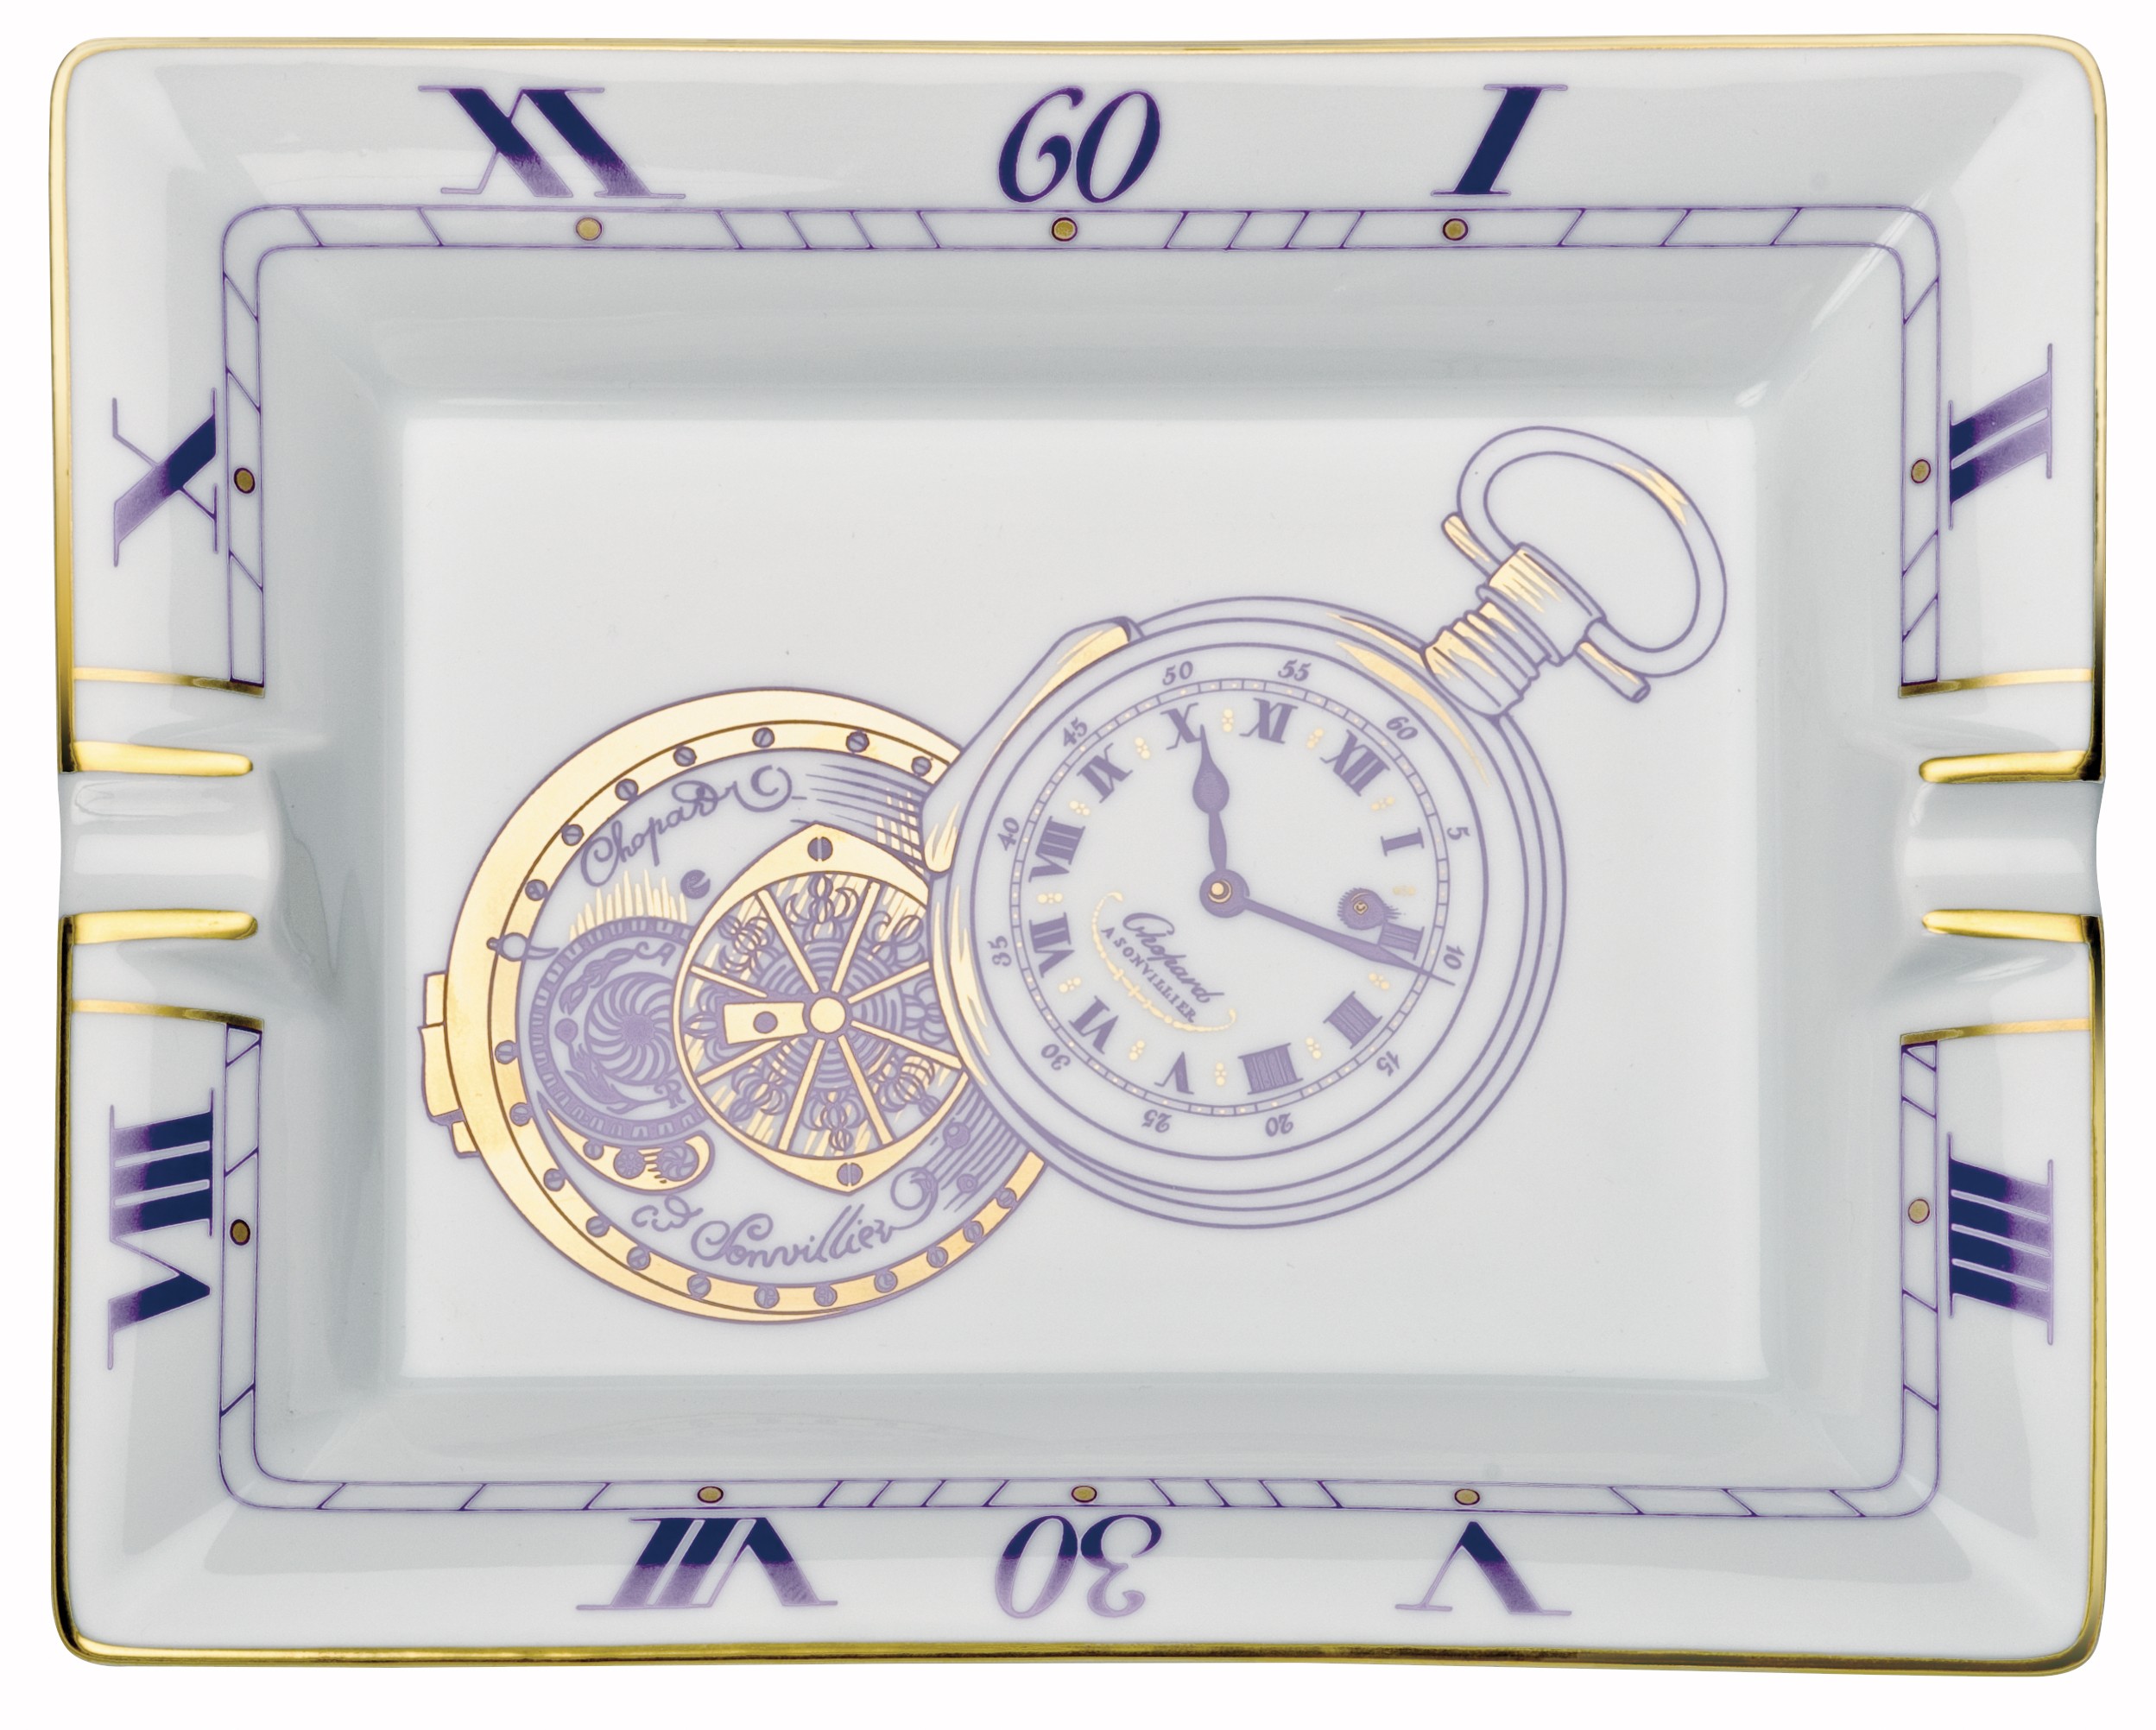 Chopard. The porcelain ashtray has a pocket watch theme with the classic timepiece carved in aubergine and gold. There are Roman numerals around the inner edge. Price on request